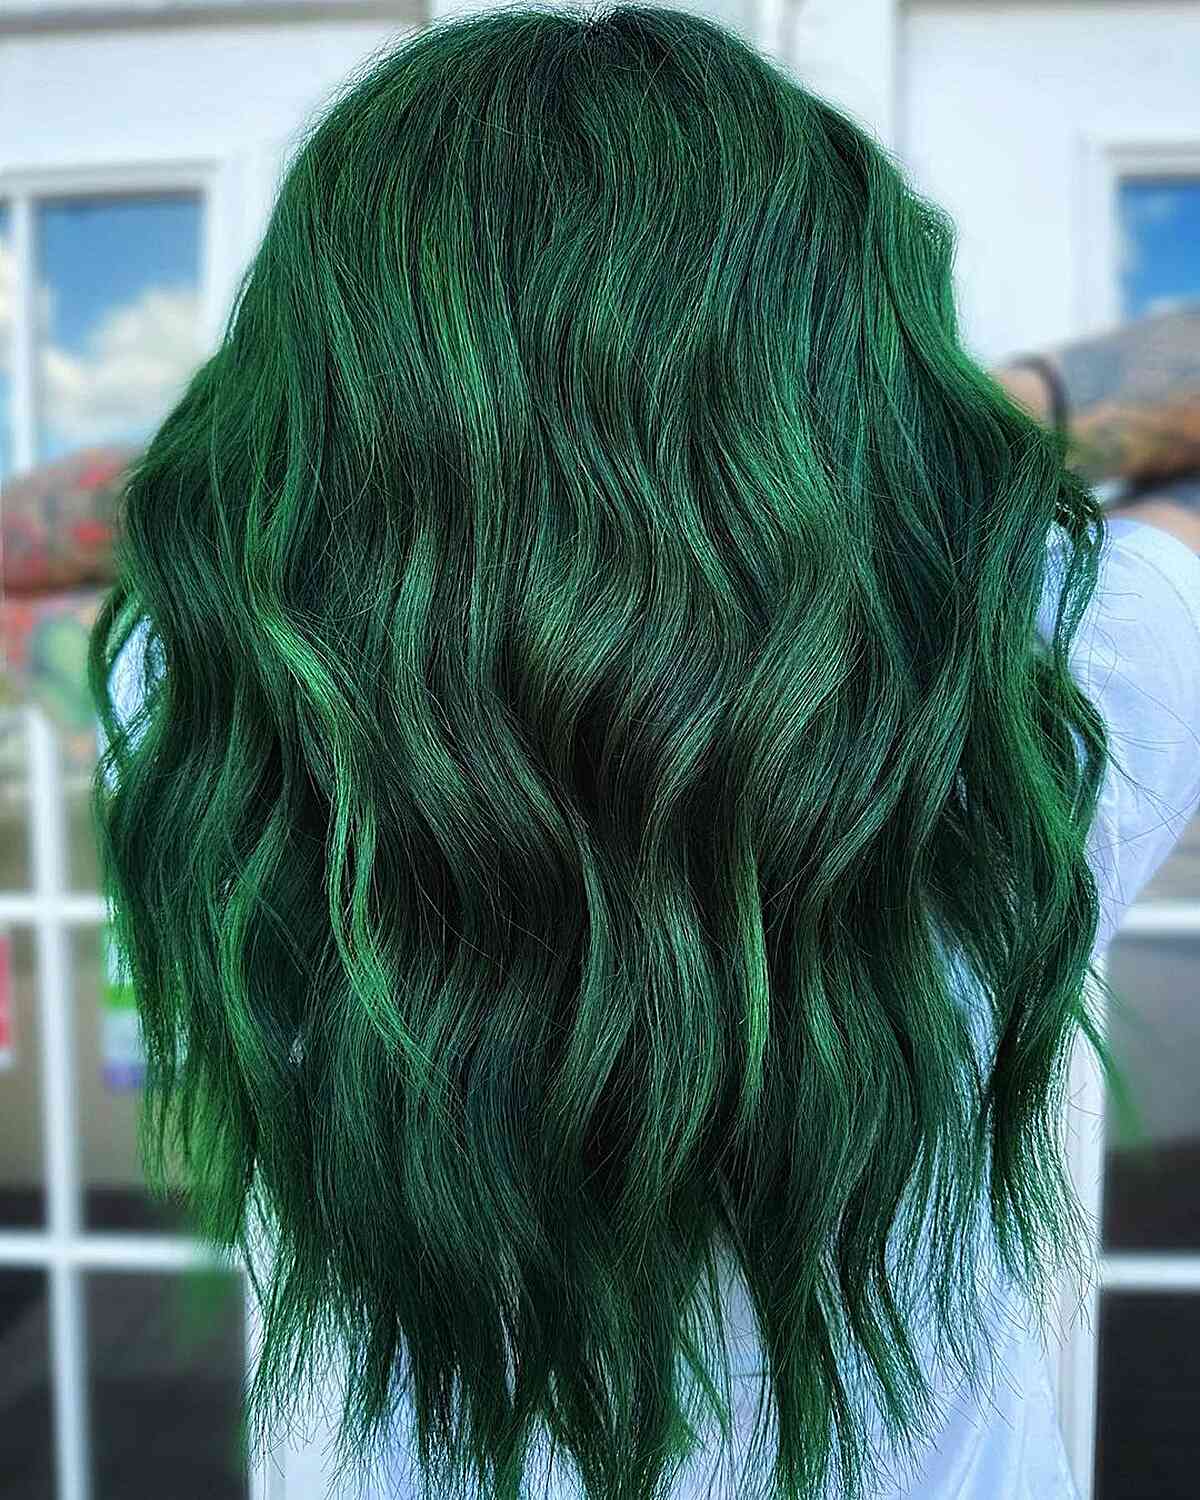 Emerald and Lighter Green Tones Hair